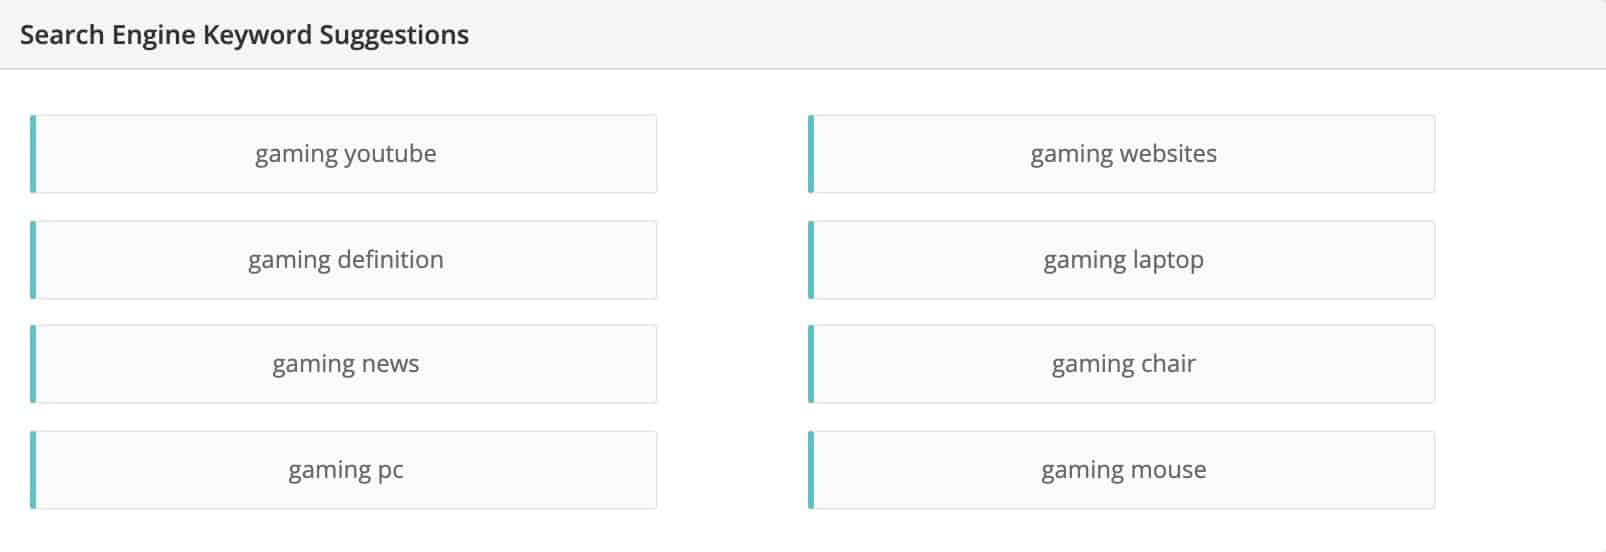 gaming niche related keywords